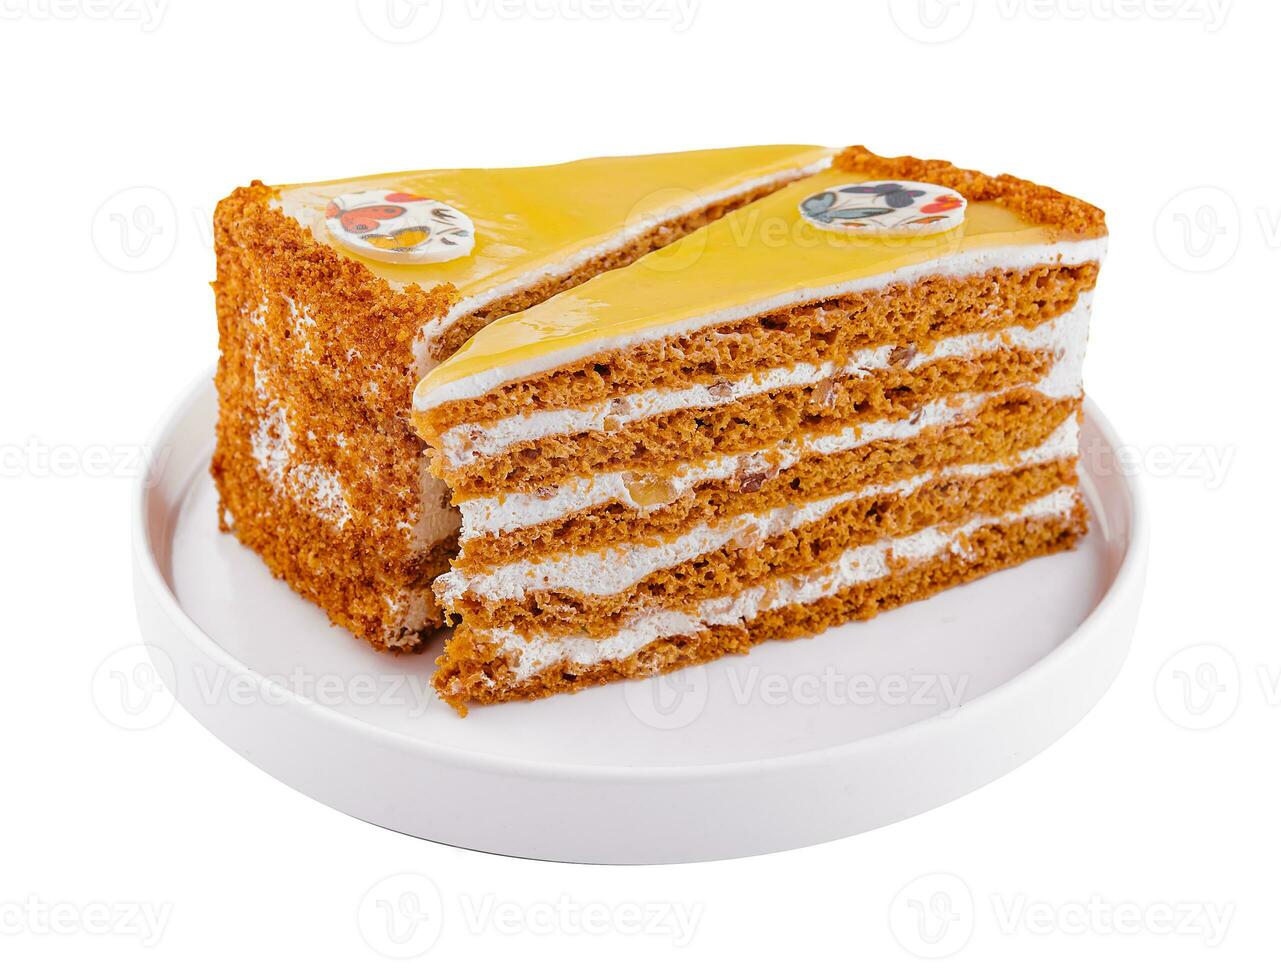 two sliced honey cake on plate photo